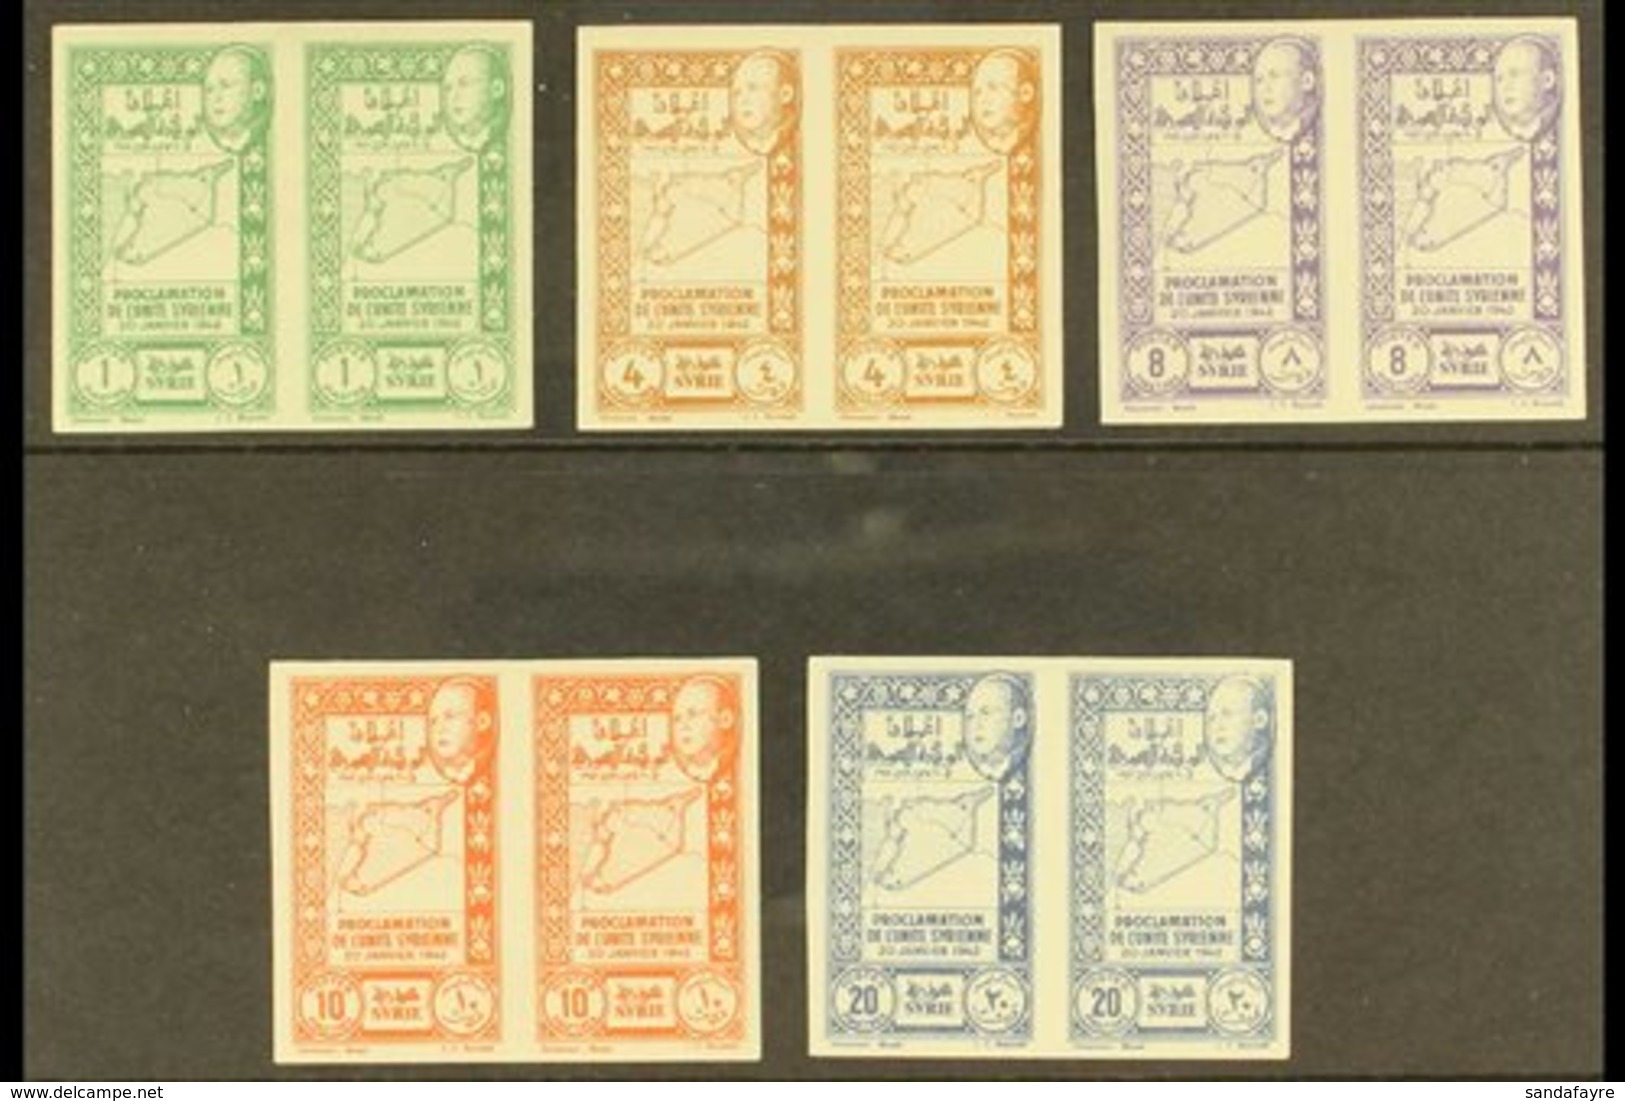 1943  Union Of Latakia & Jebel Druze With Syria - The Complete Postage Set (Maury 283/87, SG 367/71) In IMPERF PAIRS, Ne - Syrie